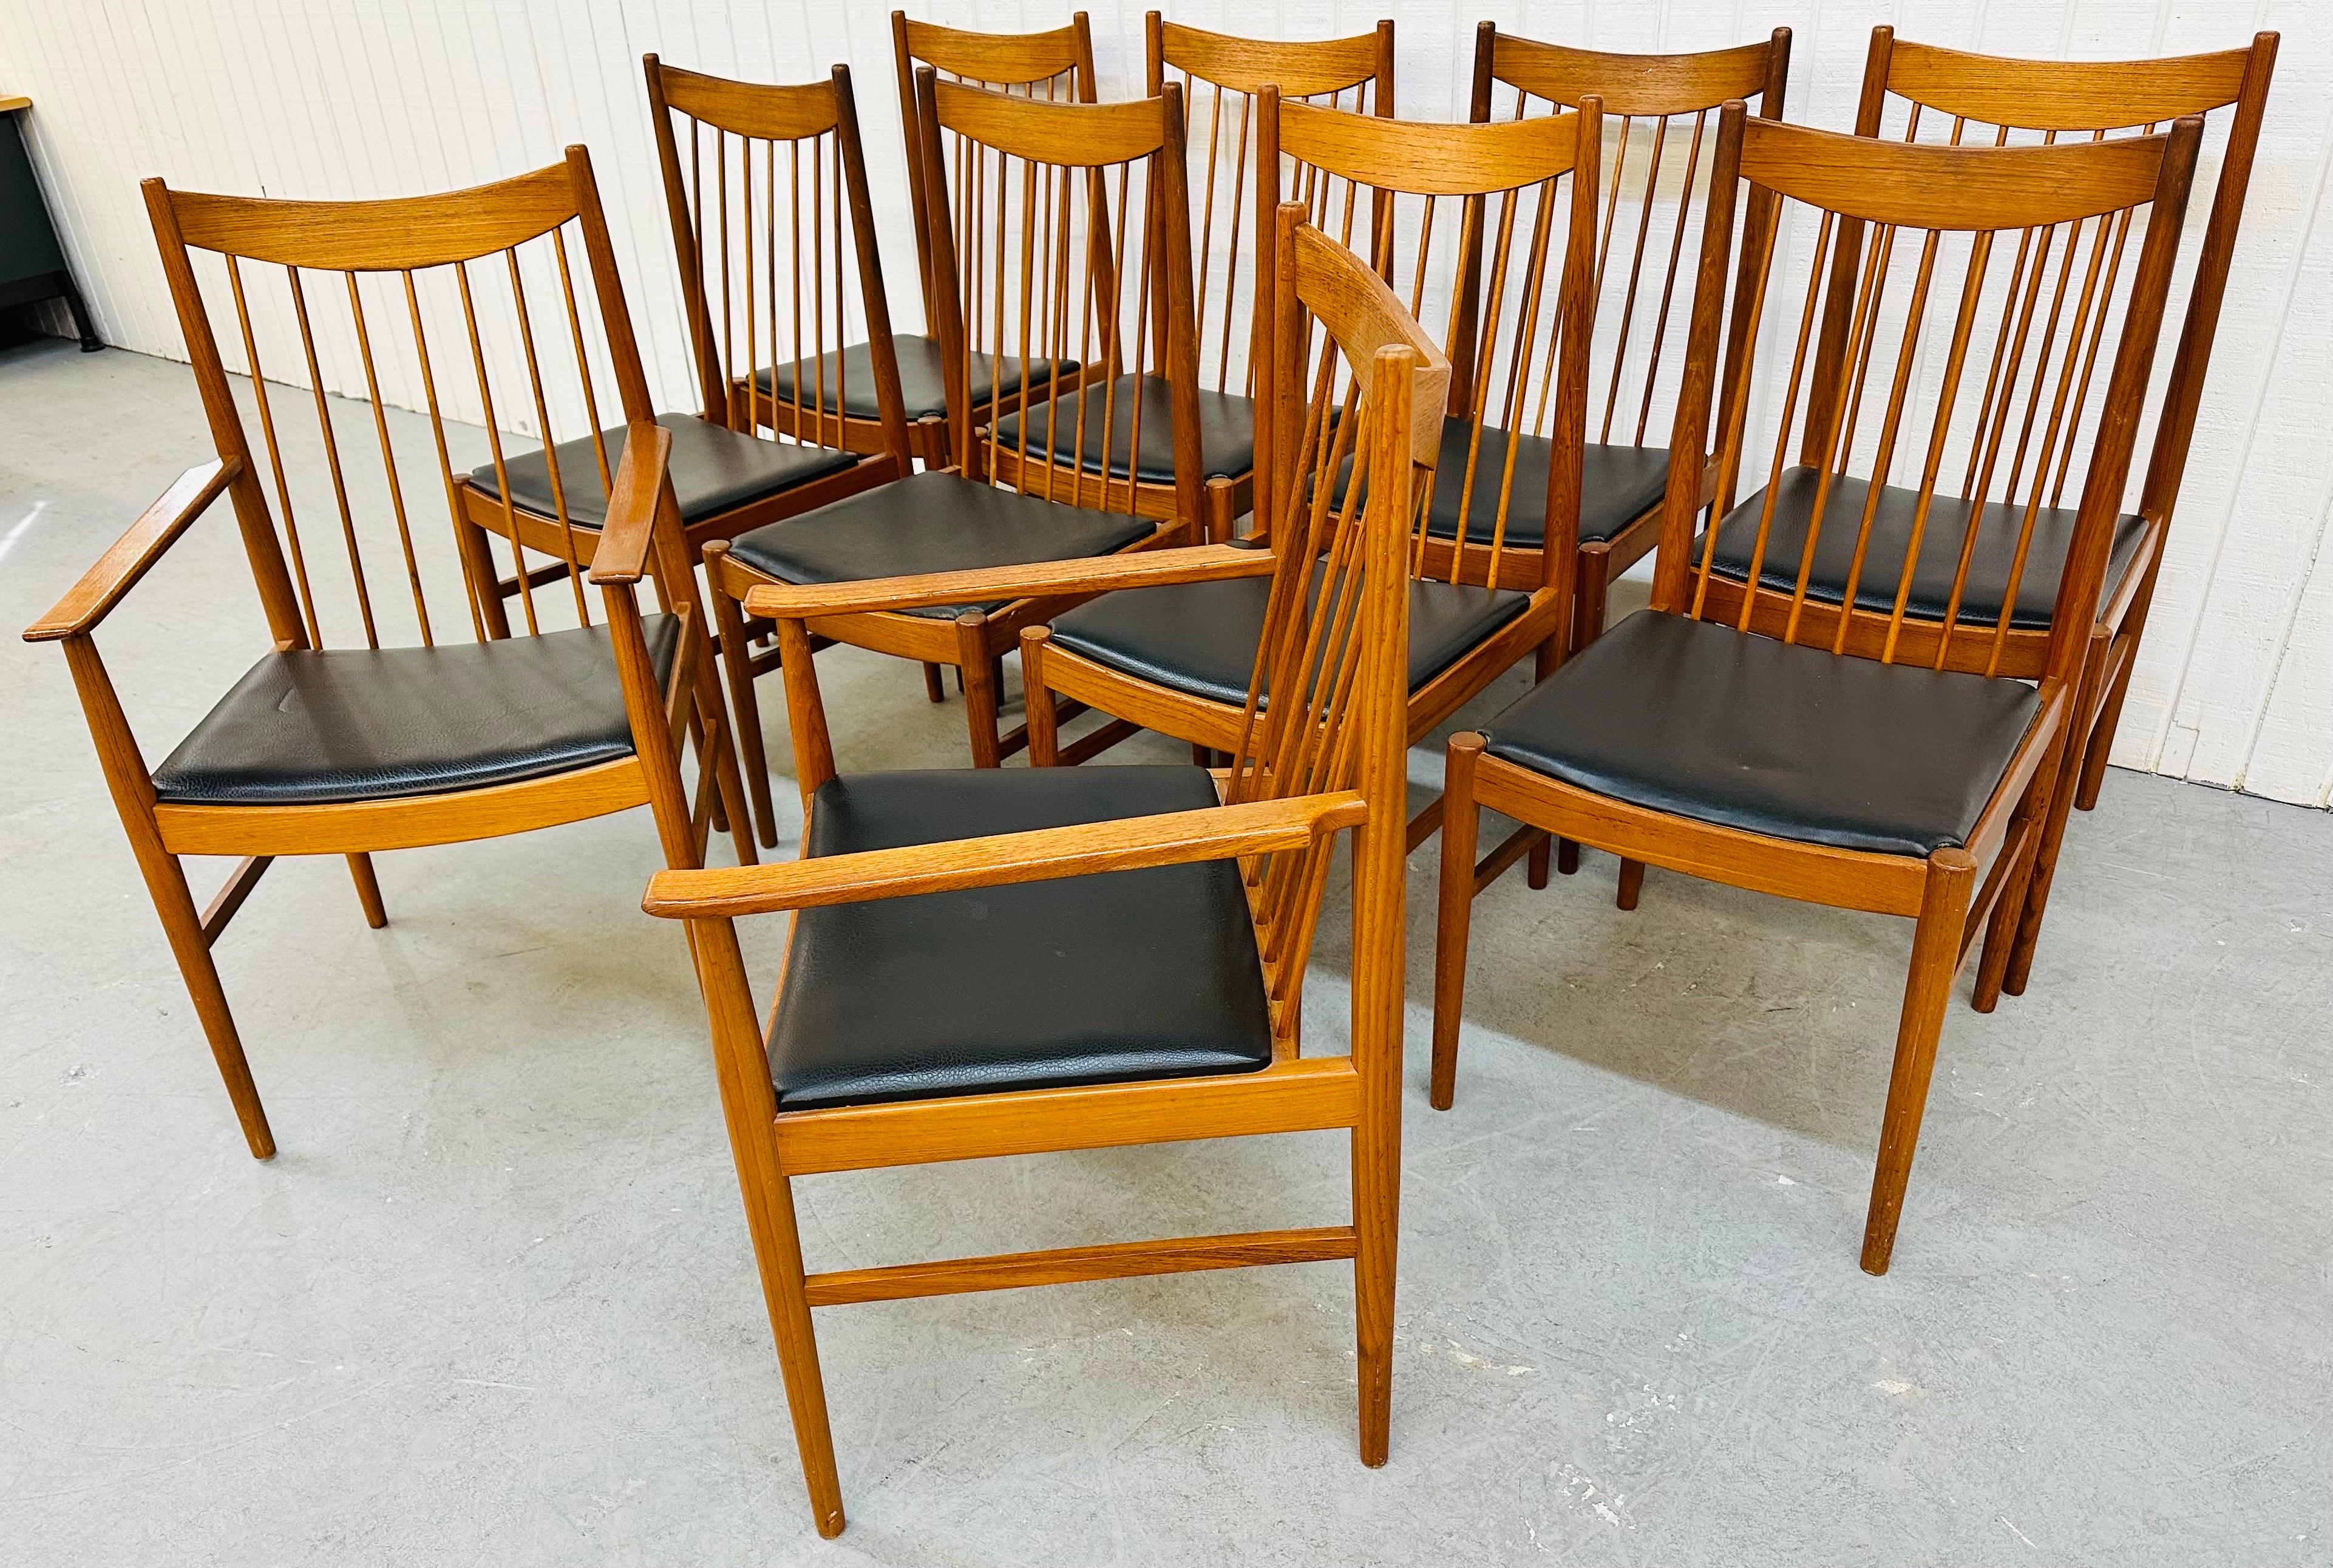 This listing is for a set of eight Mid-Century Danish Modern Teak Spindle Dining Chairs. Featuring eight straight chairs, two arm chairs, spindle backs, original black vinyl upholstery, curved back rest tops, and a beautiful teak finish.